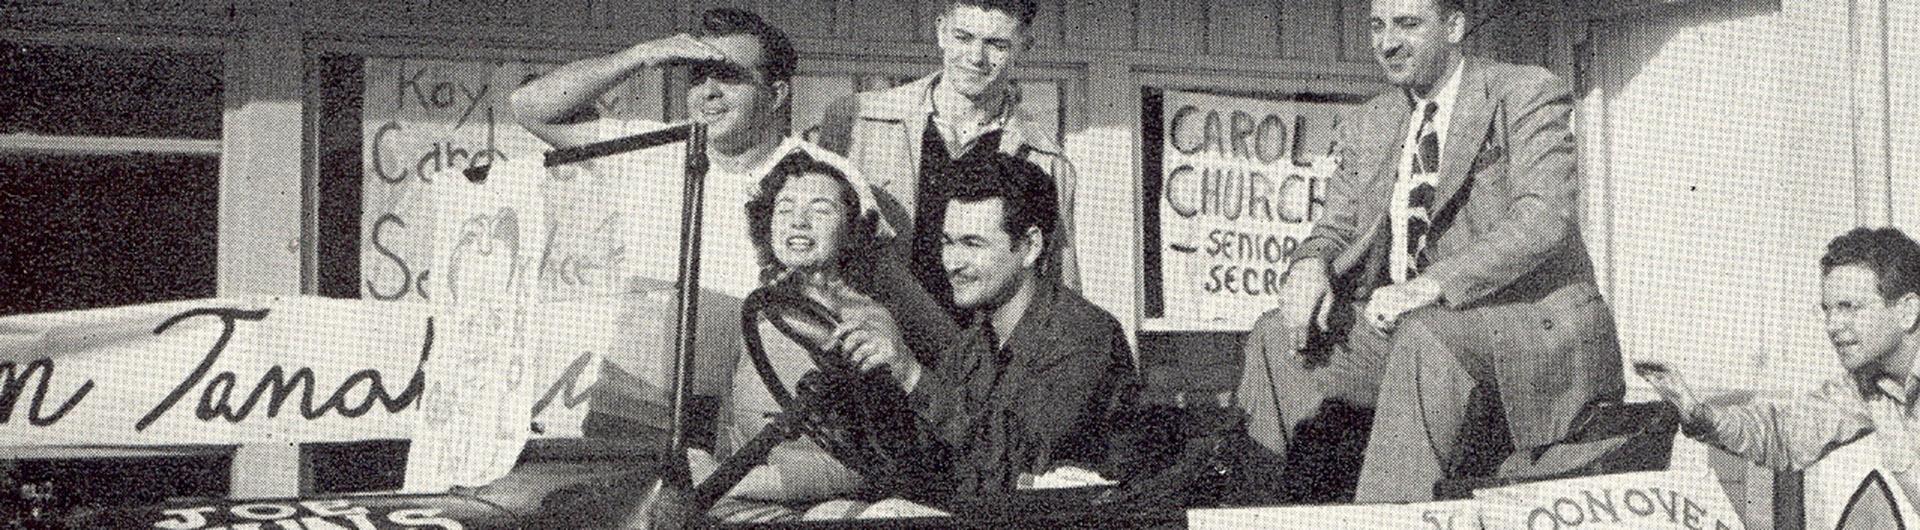 1950s image, students in a car